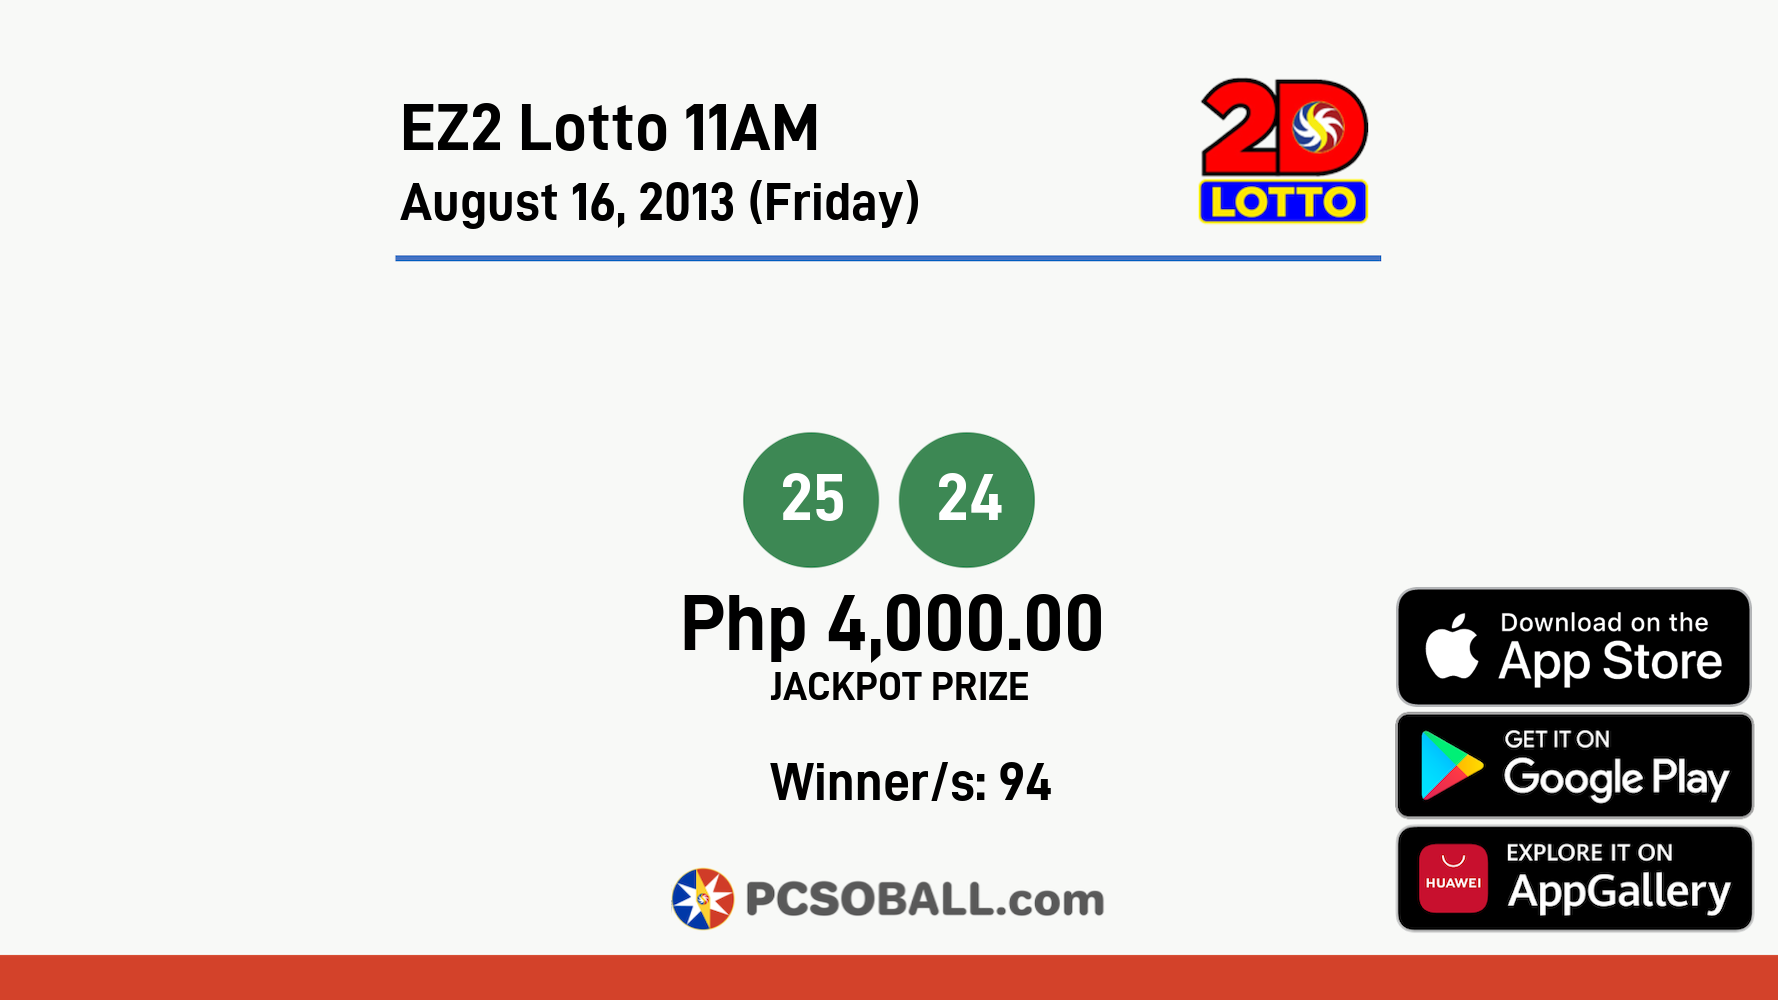 EZ2 Lotto 11AM August 16, 2013 (Friday) Result